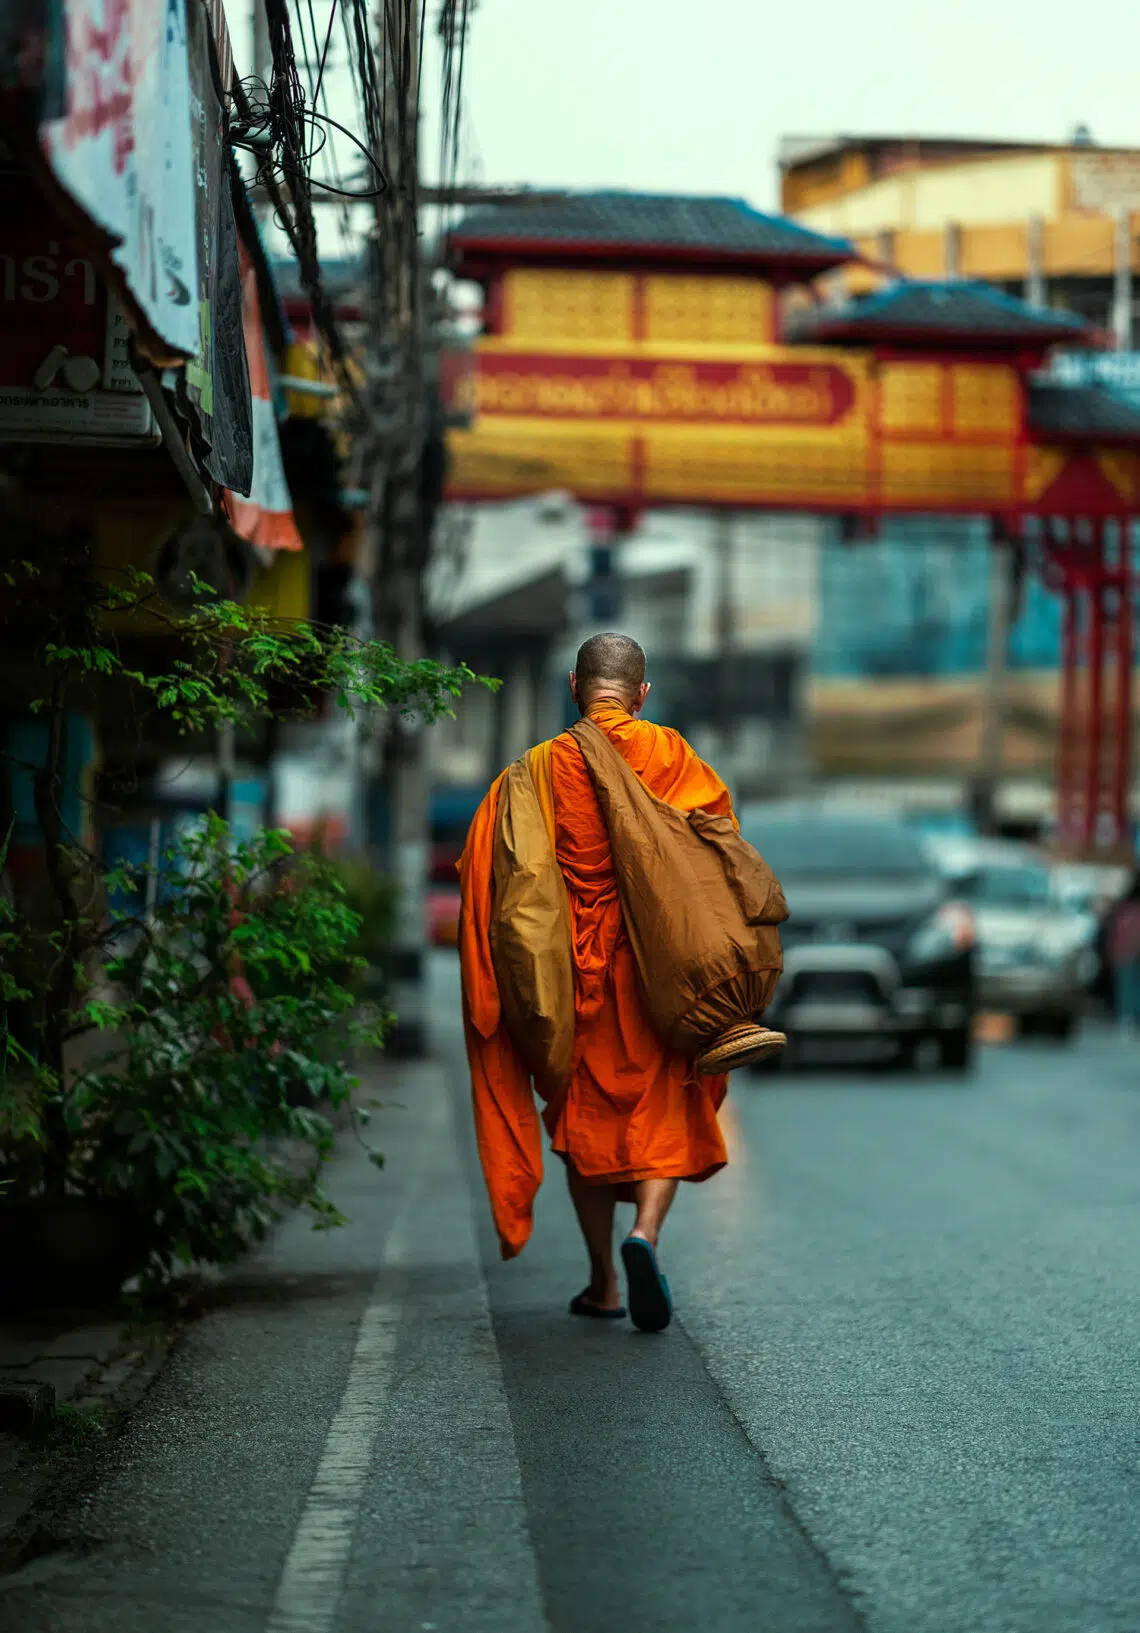 From the Streets of Chiang Mai